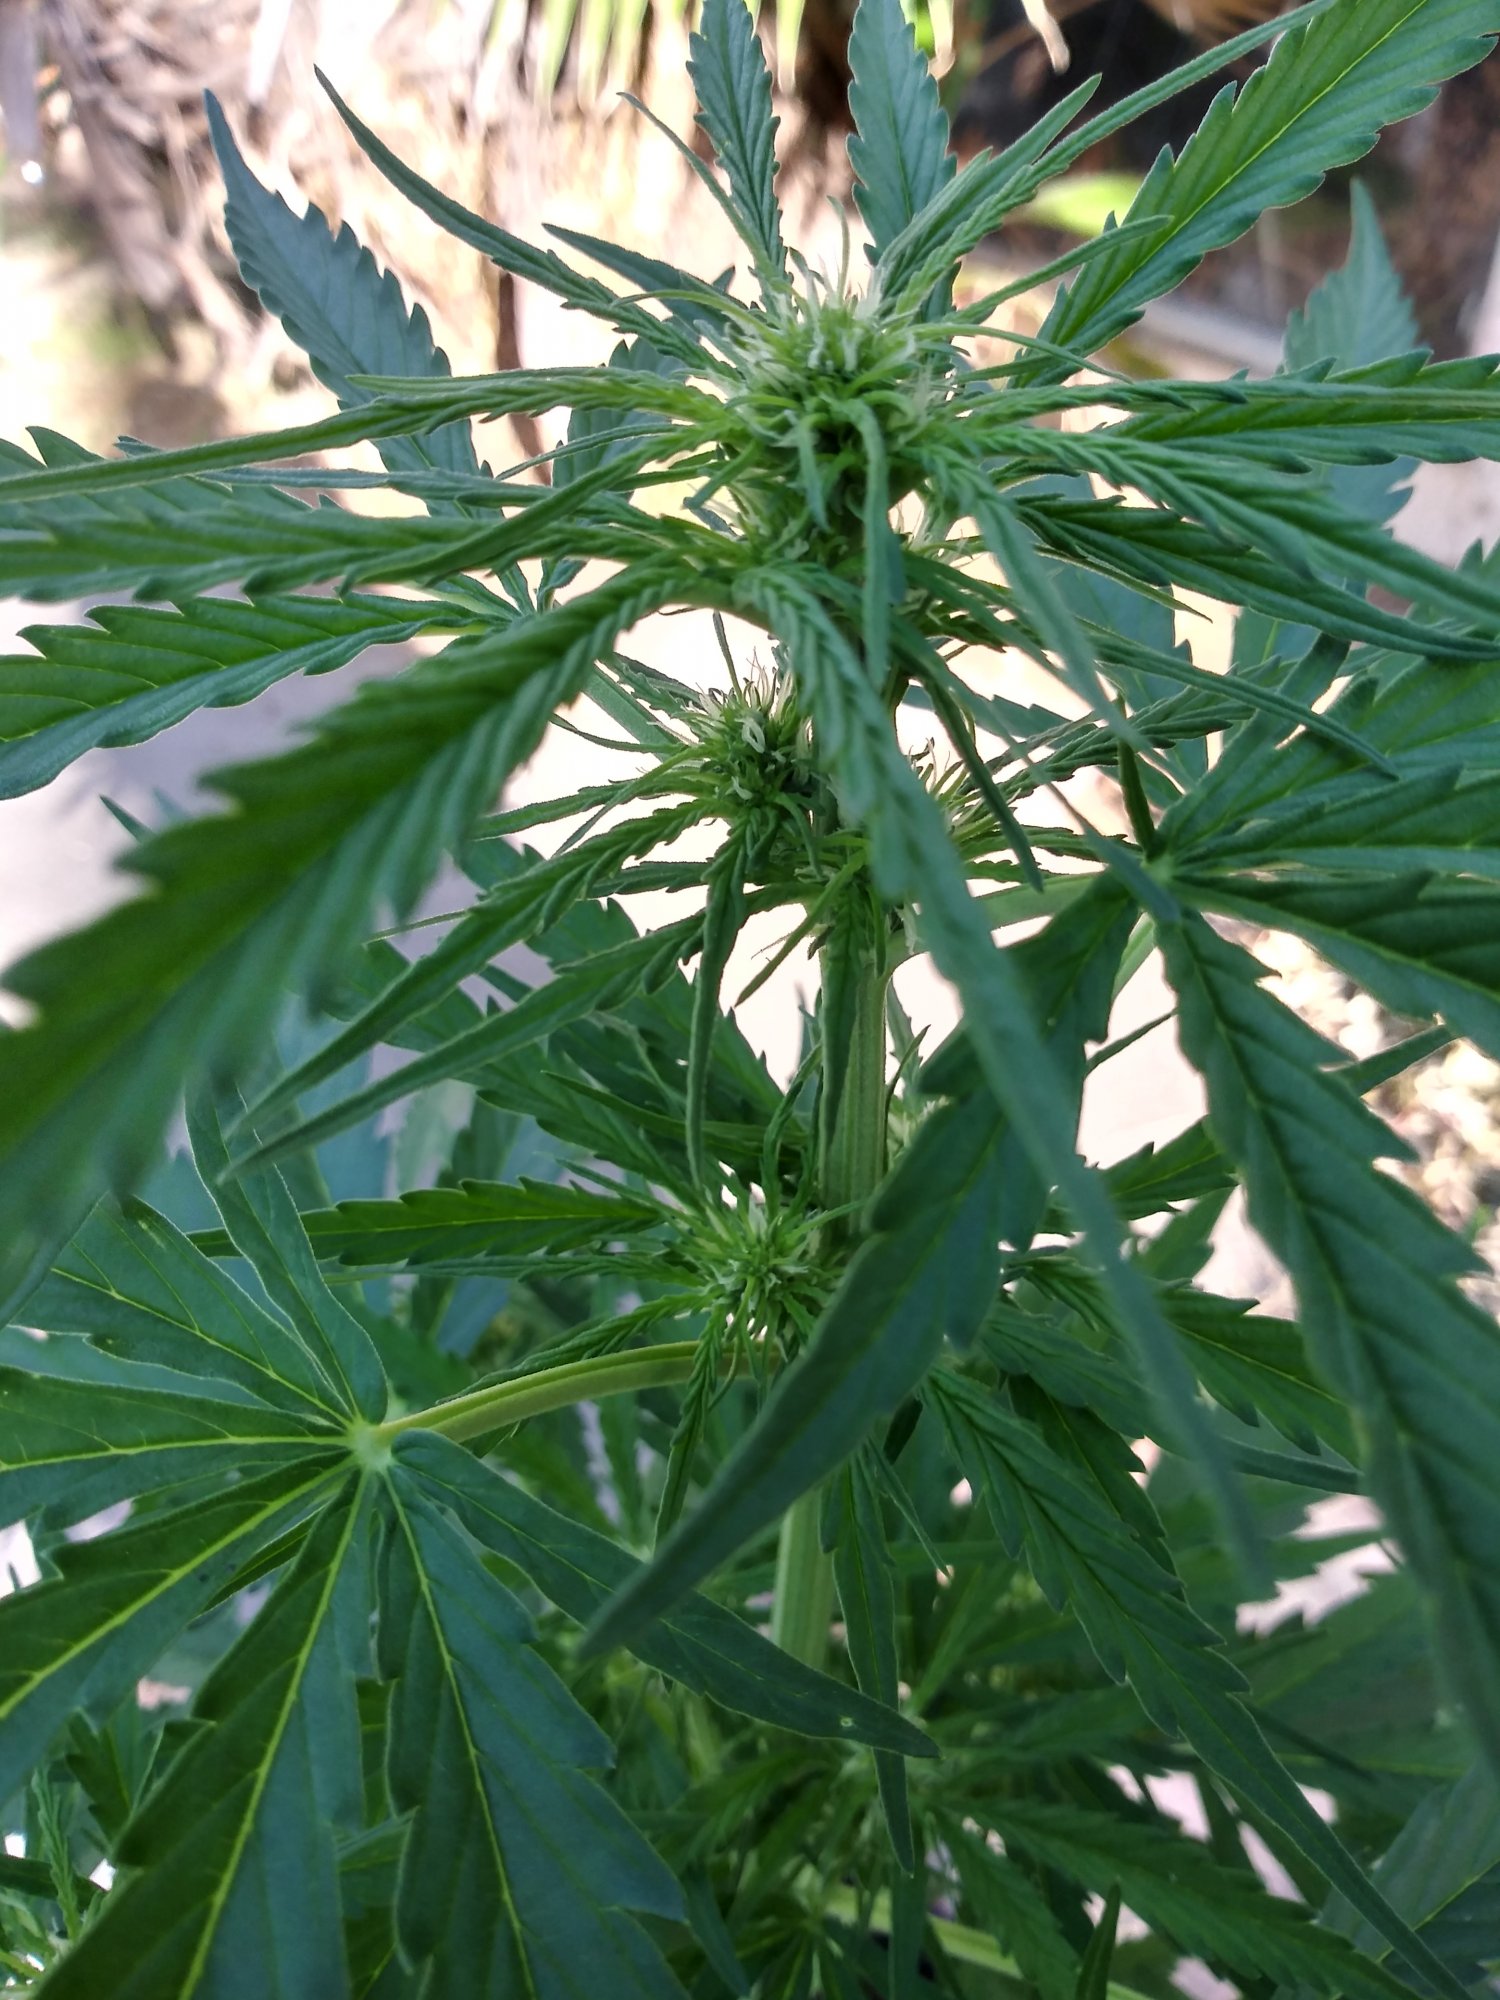 Bud boost yet first time grower question